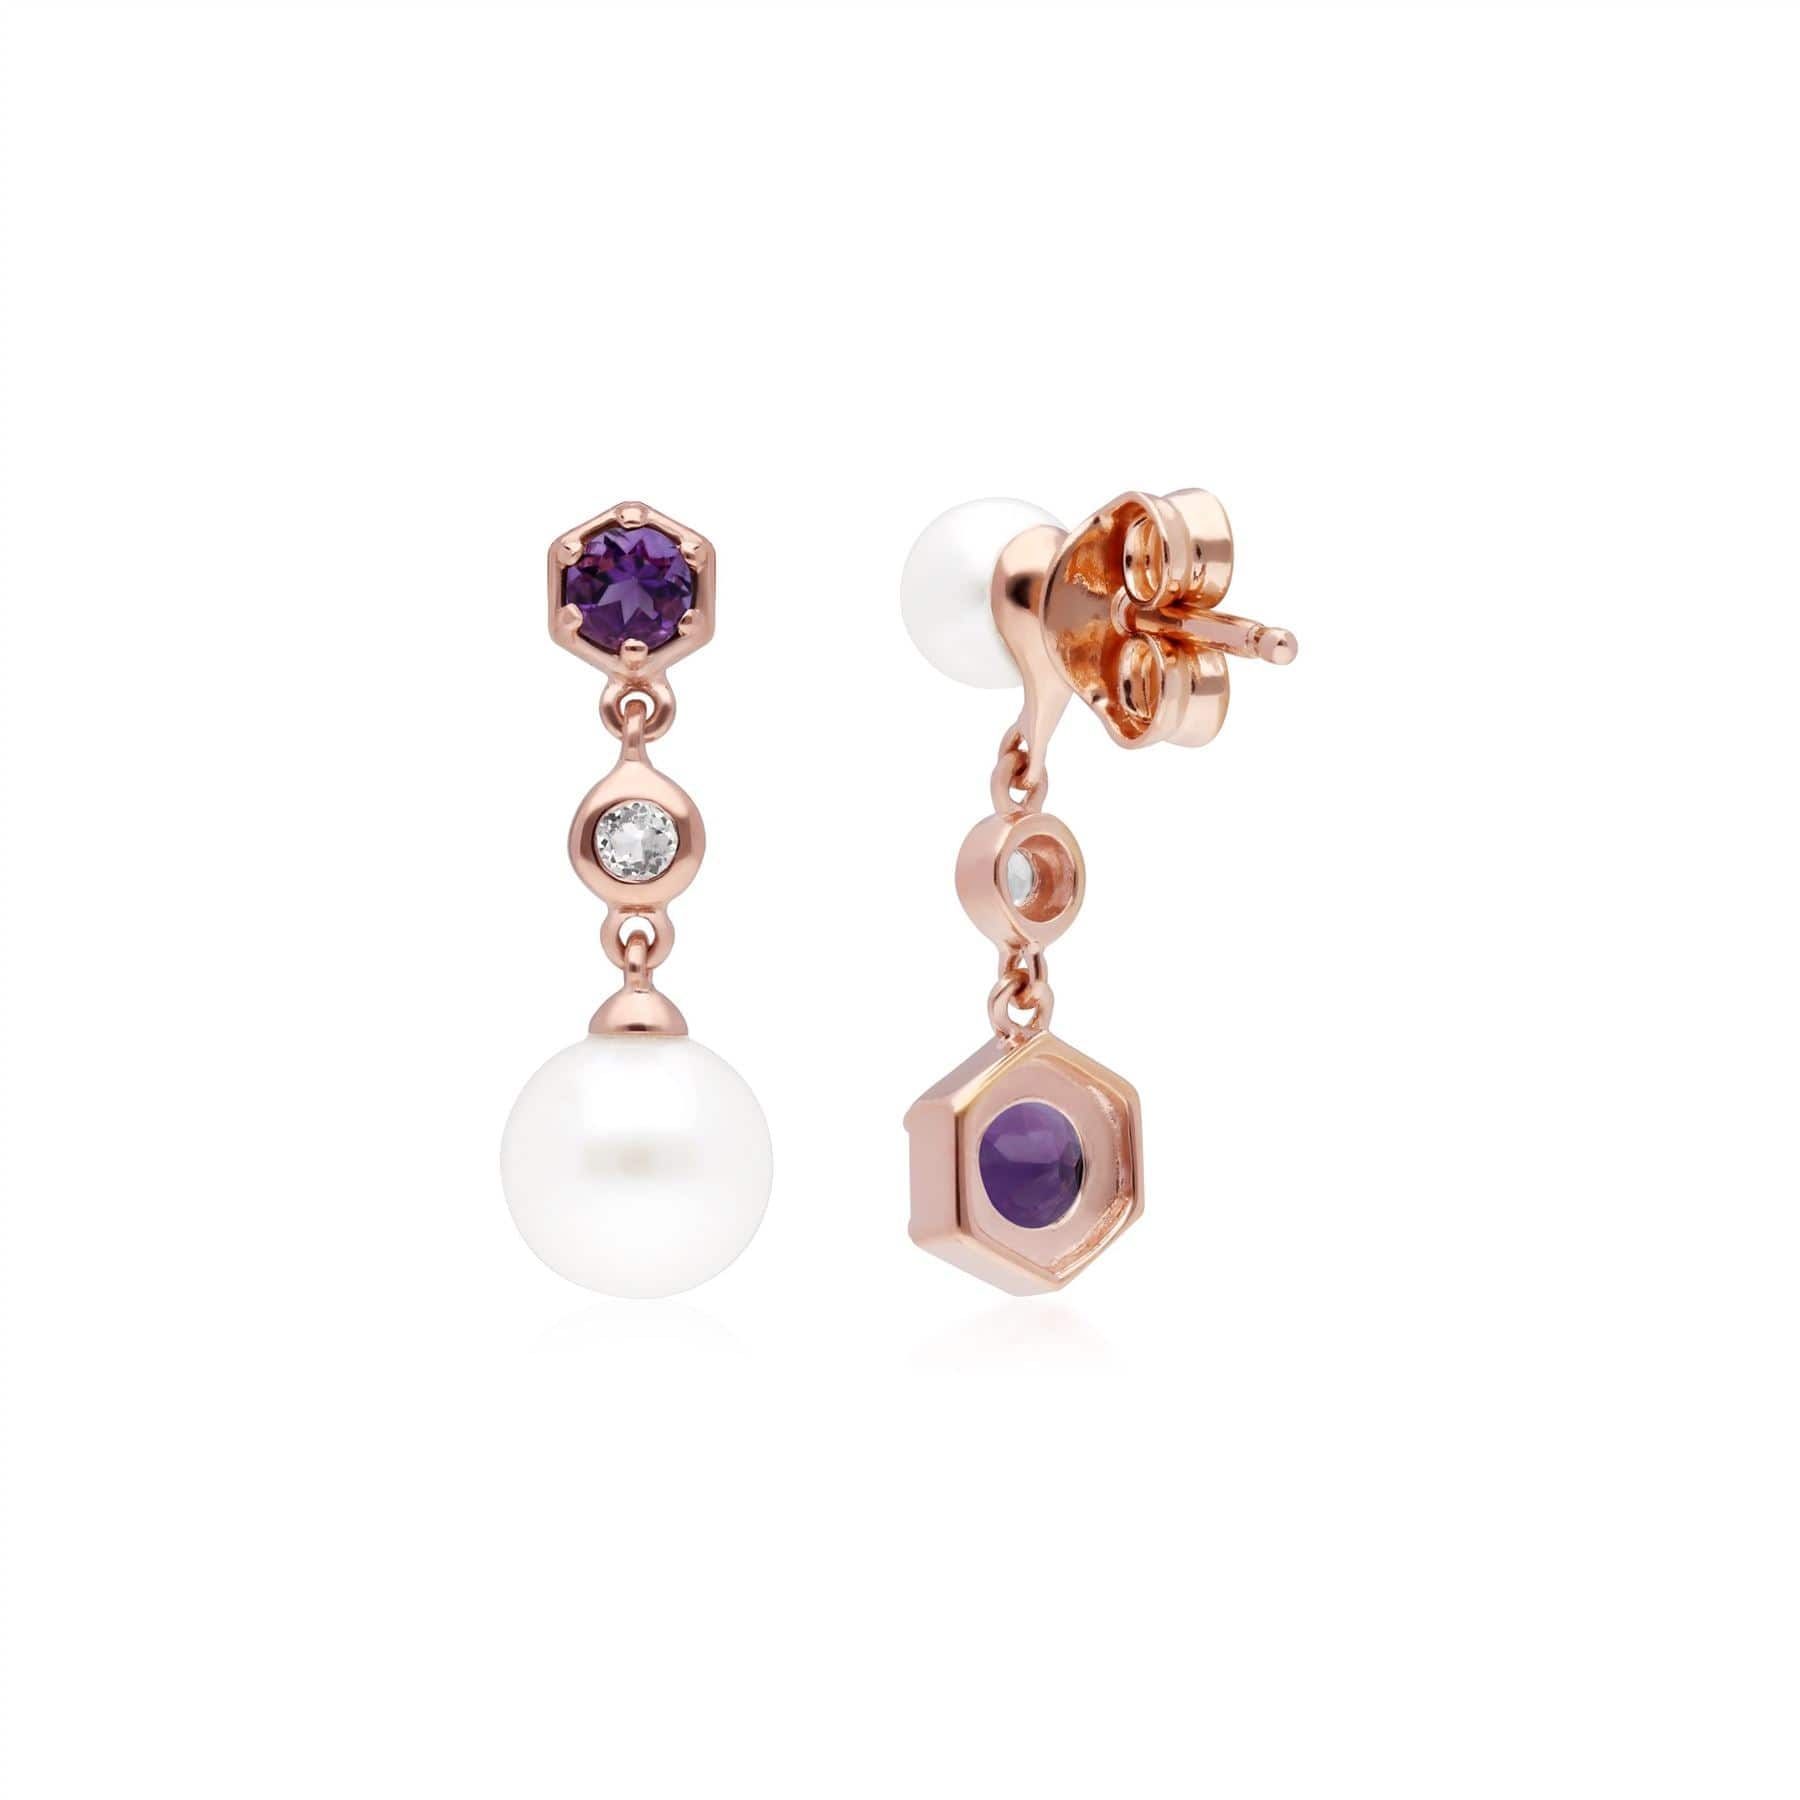 Modern Pearl, Amethyst & Topaz Mismatched Drop Earrings in Rose Gold Plated Sterling Silver